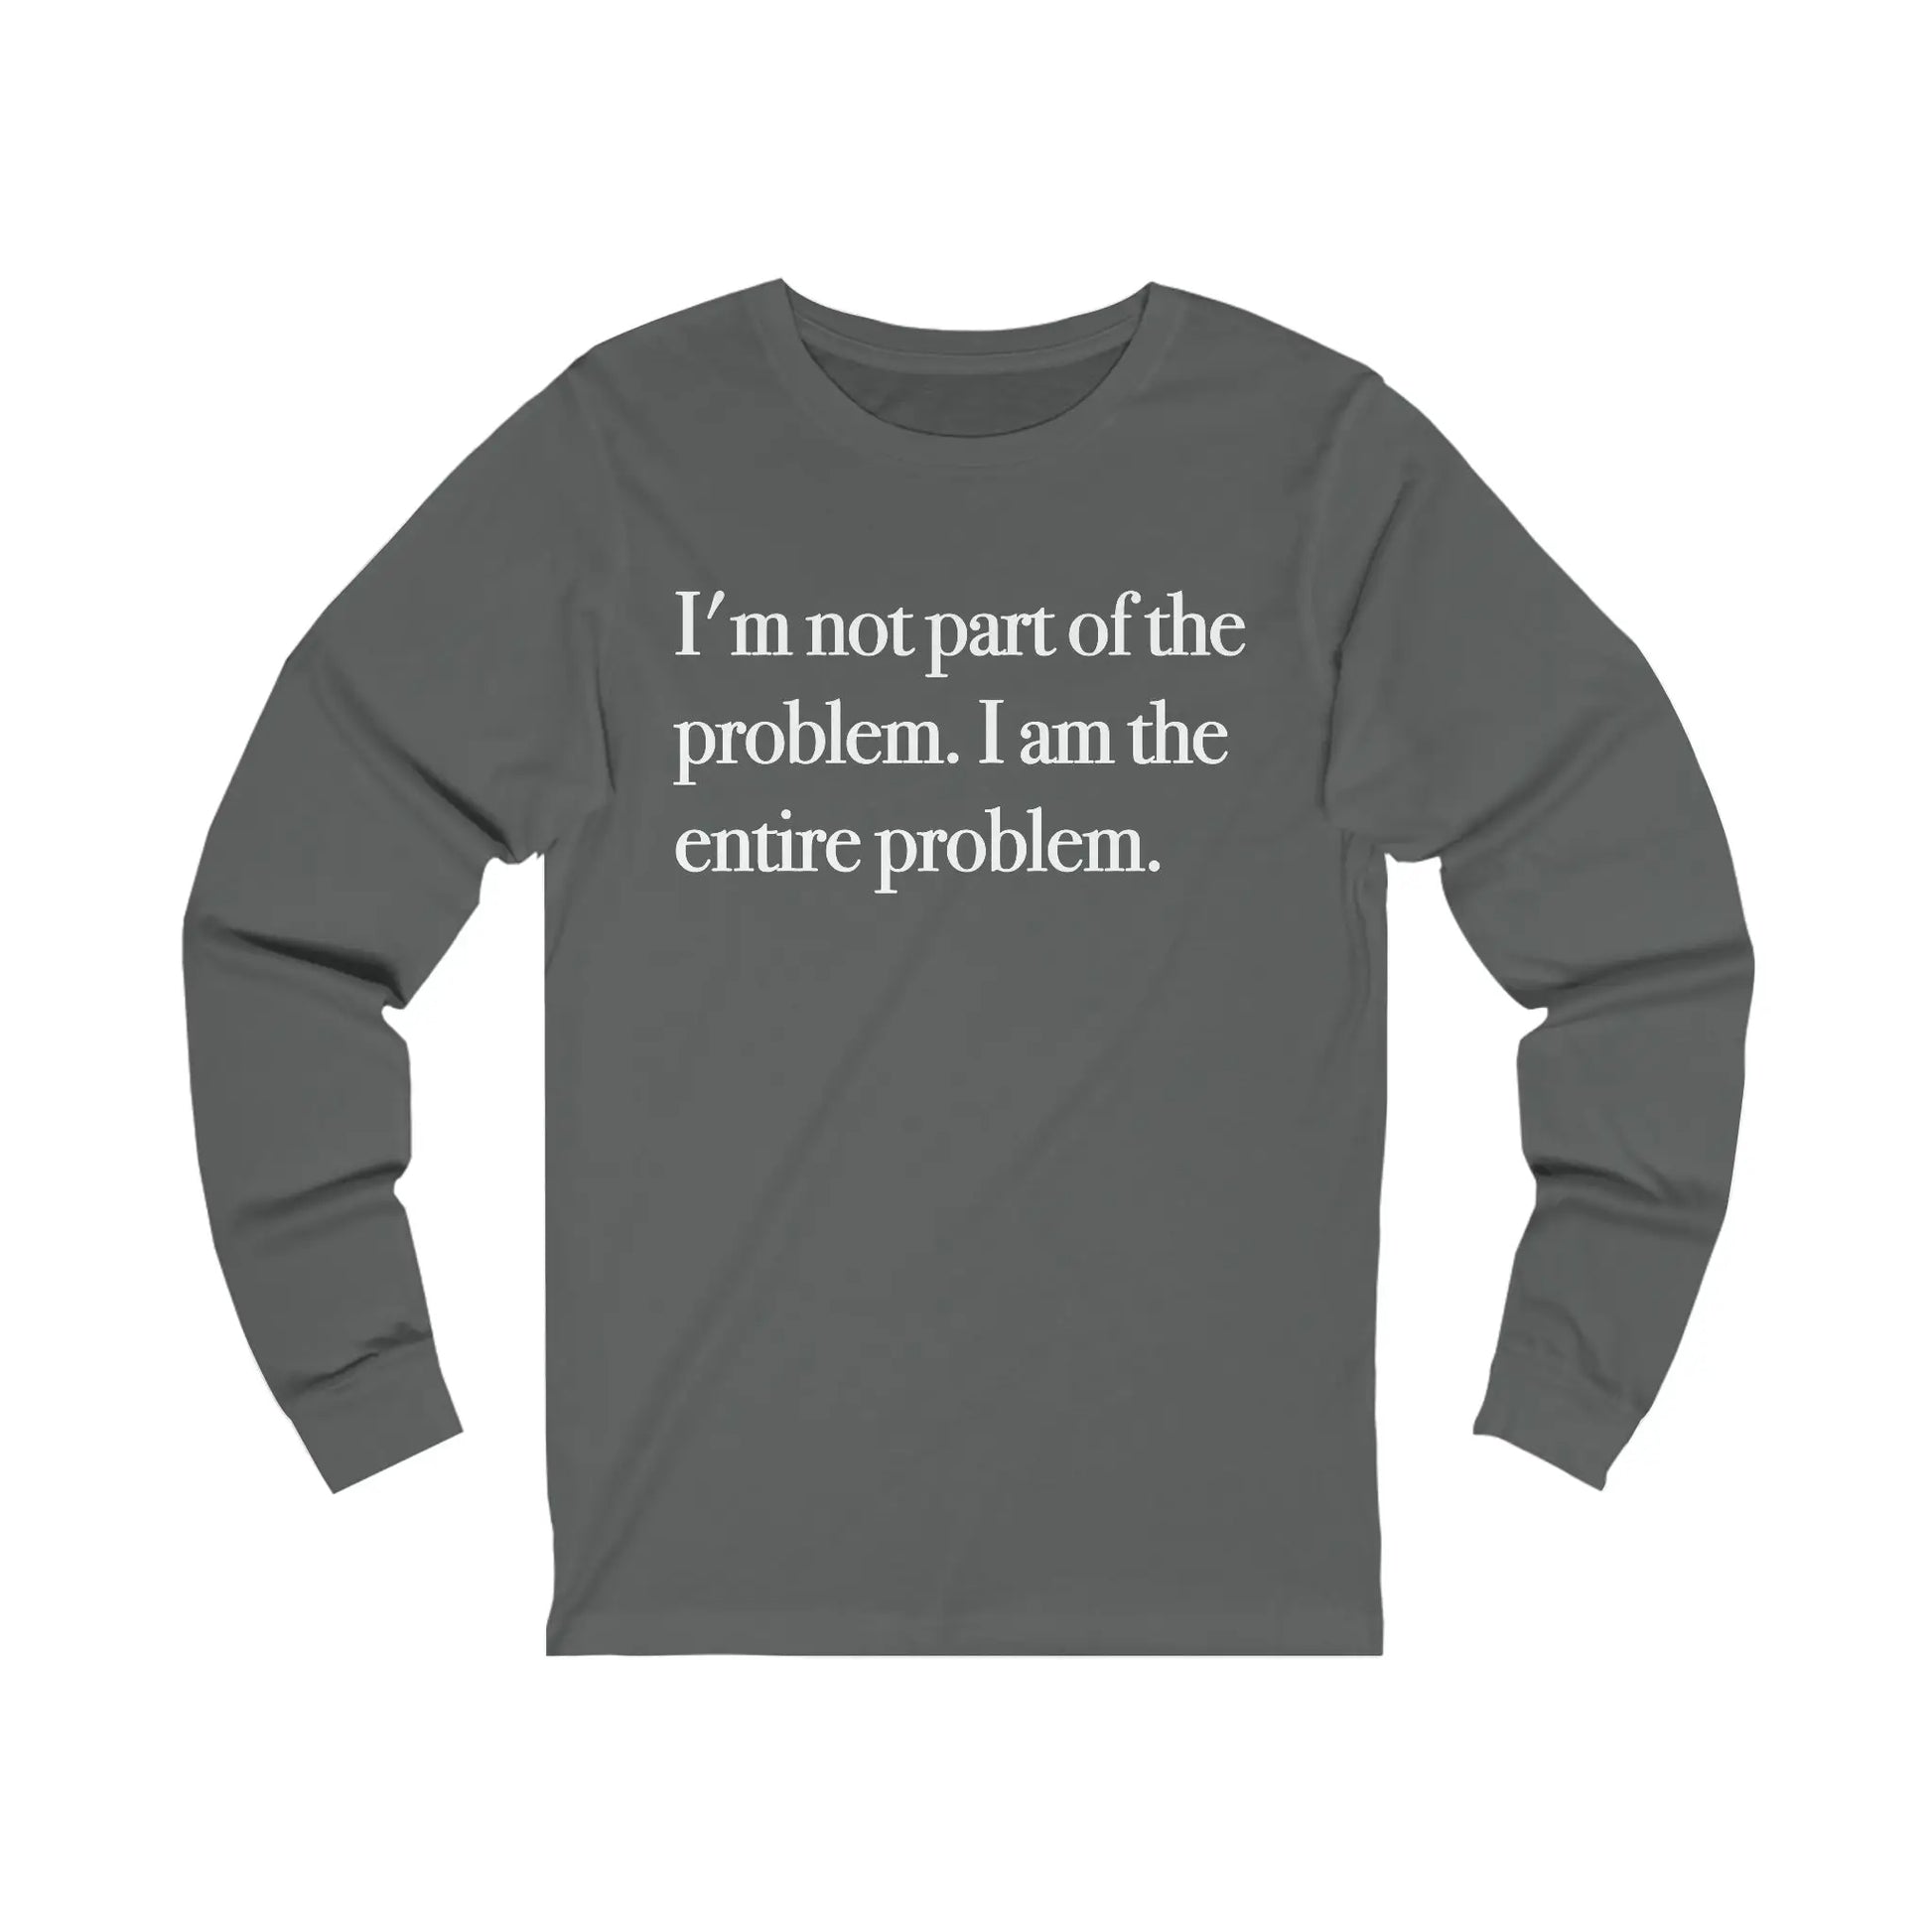 Part Of The Problem Men's Long Sleeve Tee - Wicked Tees